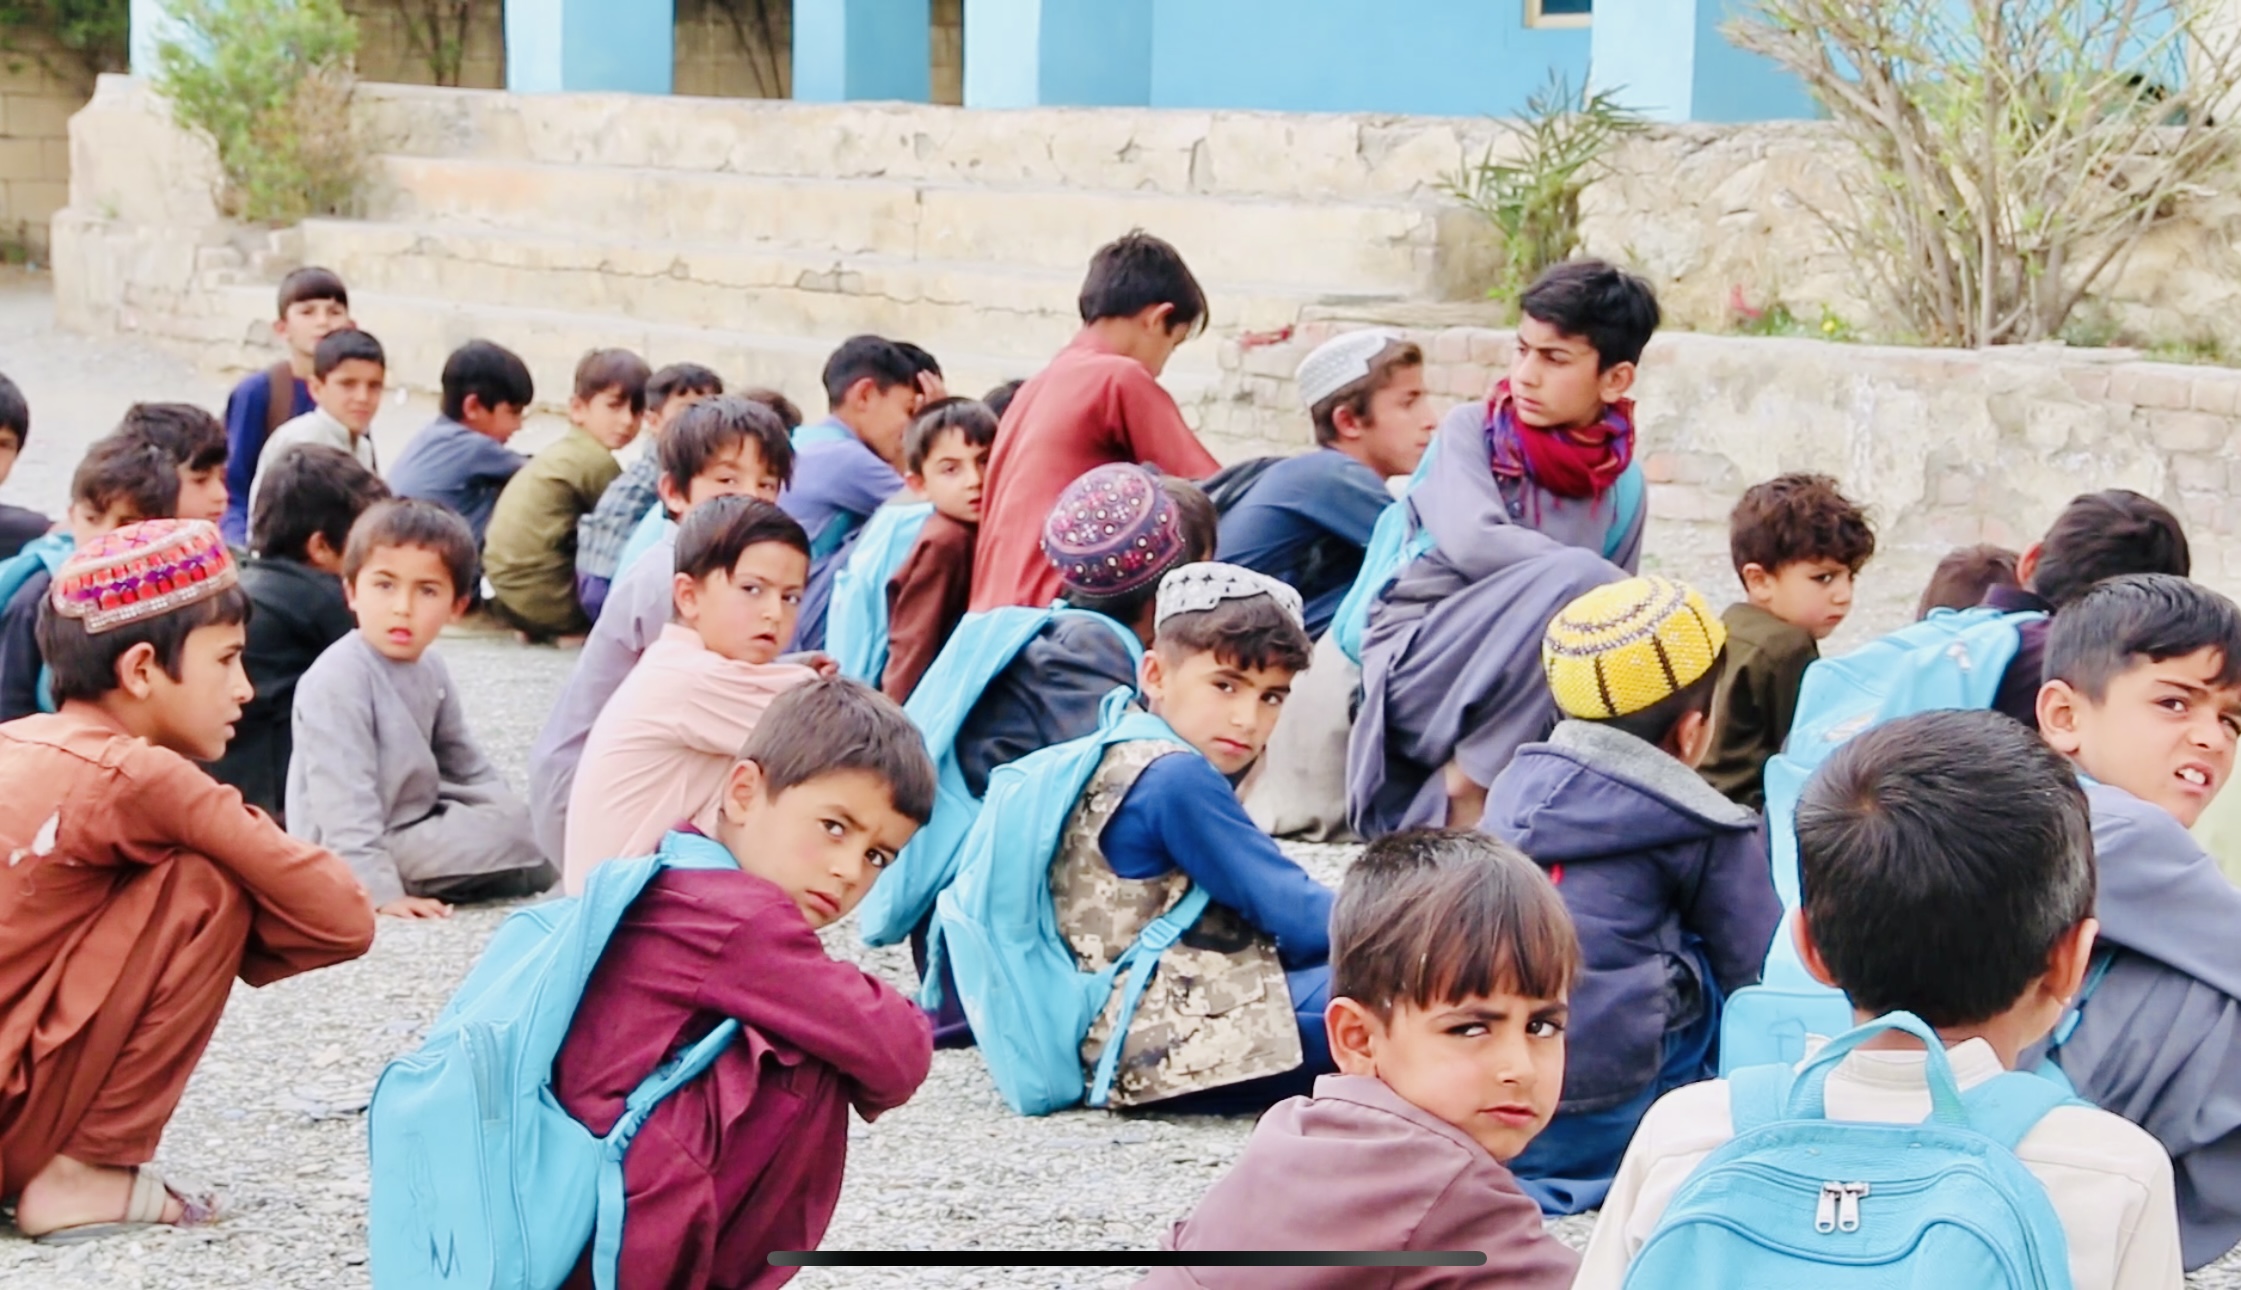 Young people in Khost have launched a campaign to enroll children in schools